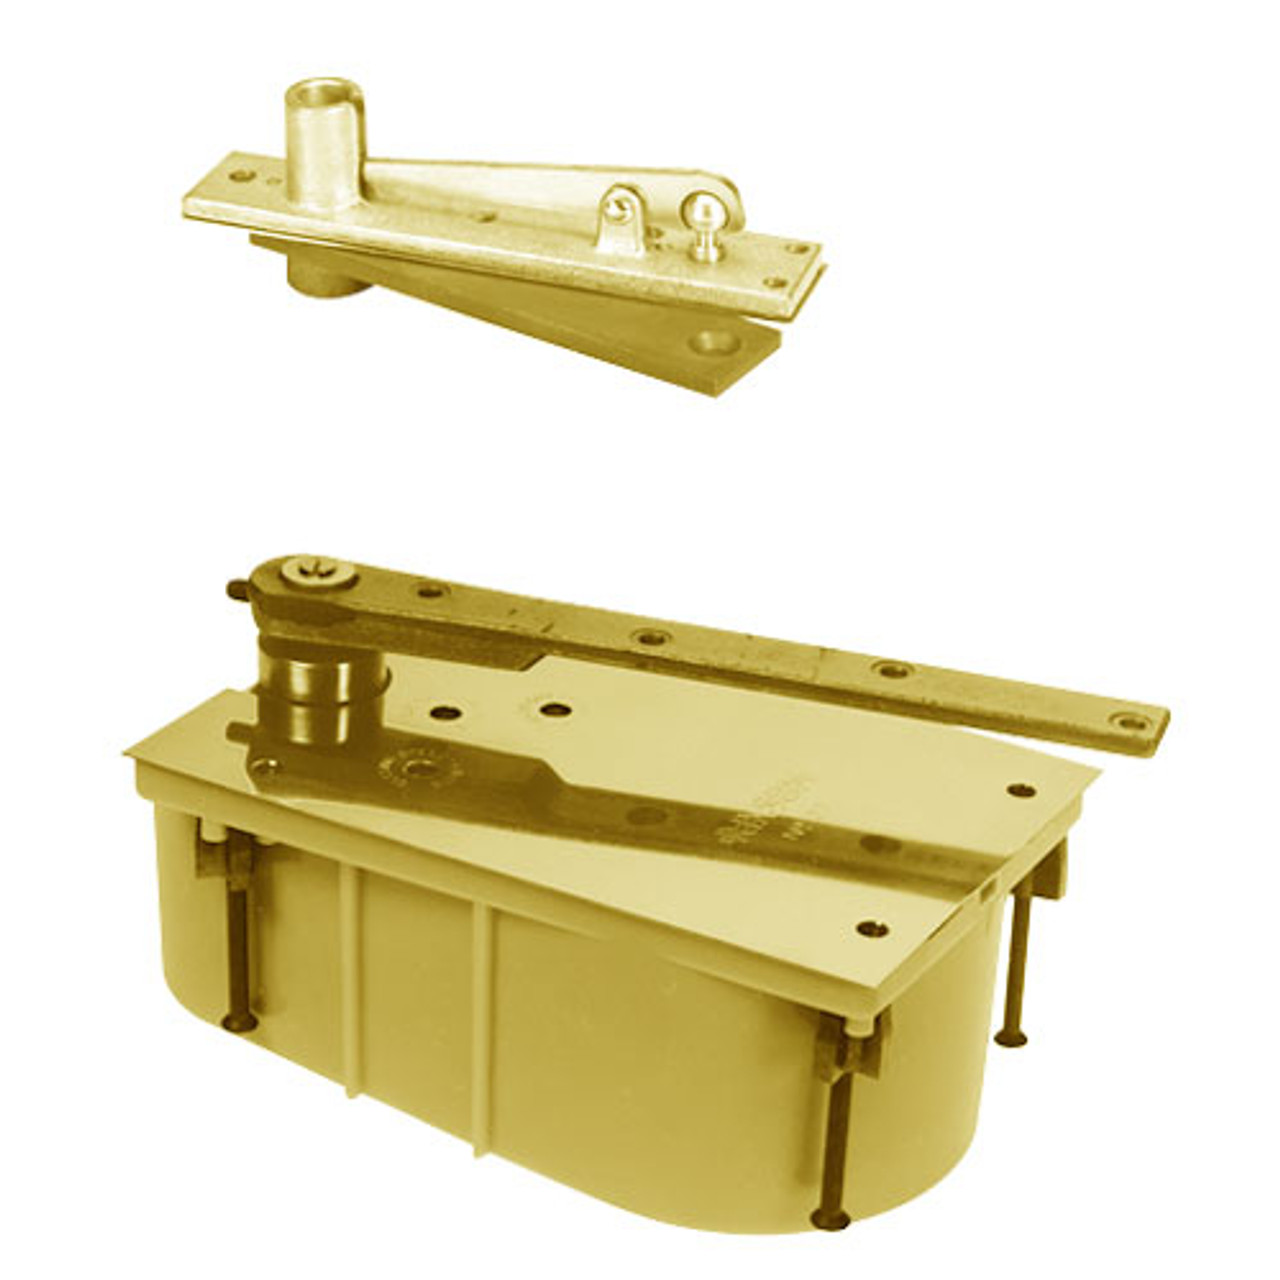 SC28-85S-554-CWF-LH-605 Rixson 28 Series Heavy Duty Single Acting Center Hung Floor Closer with Concealed Arm in Bright Brass Finish